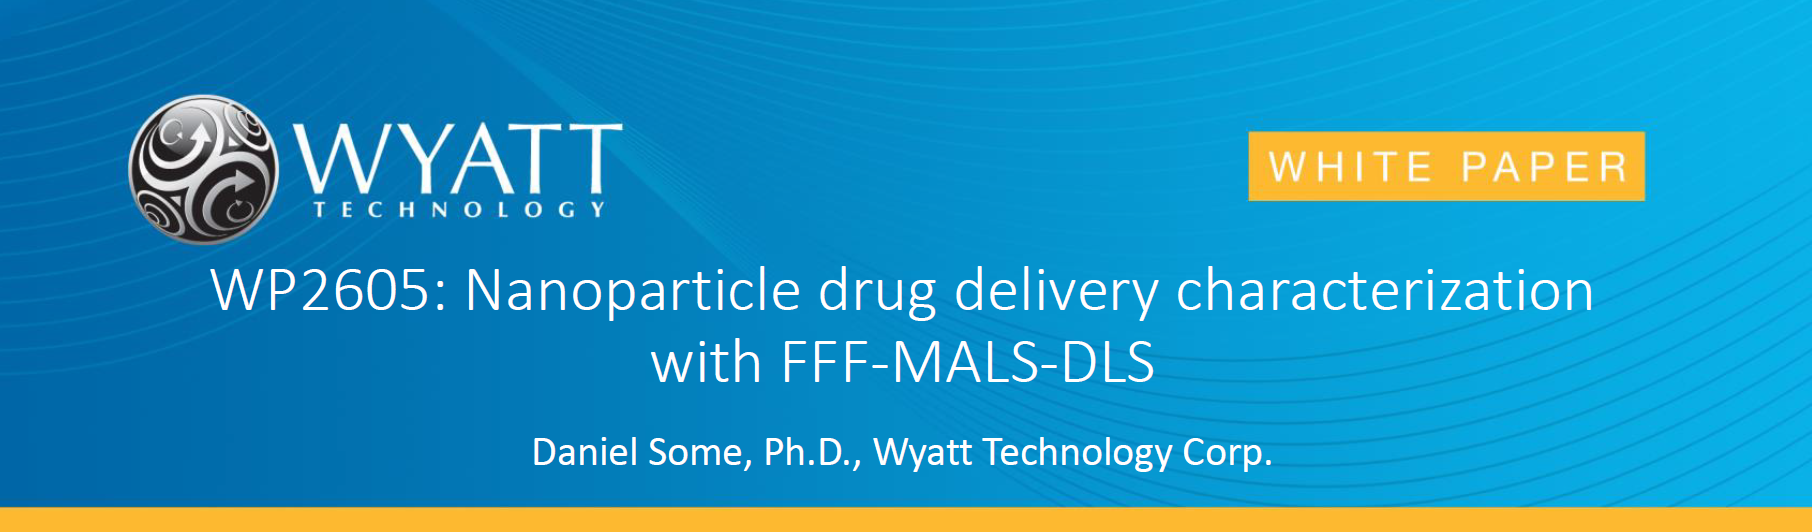 WP2605-nanoparticle-drug-delivery-characterization-with-FFF-MALS-DLS_#1.PNG